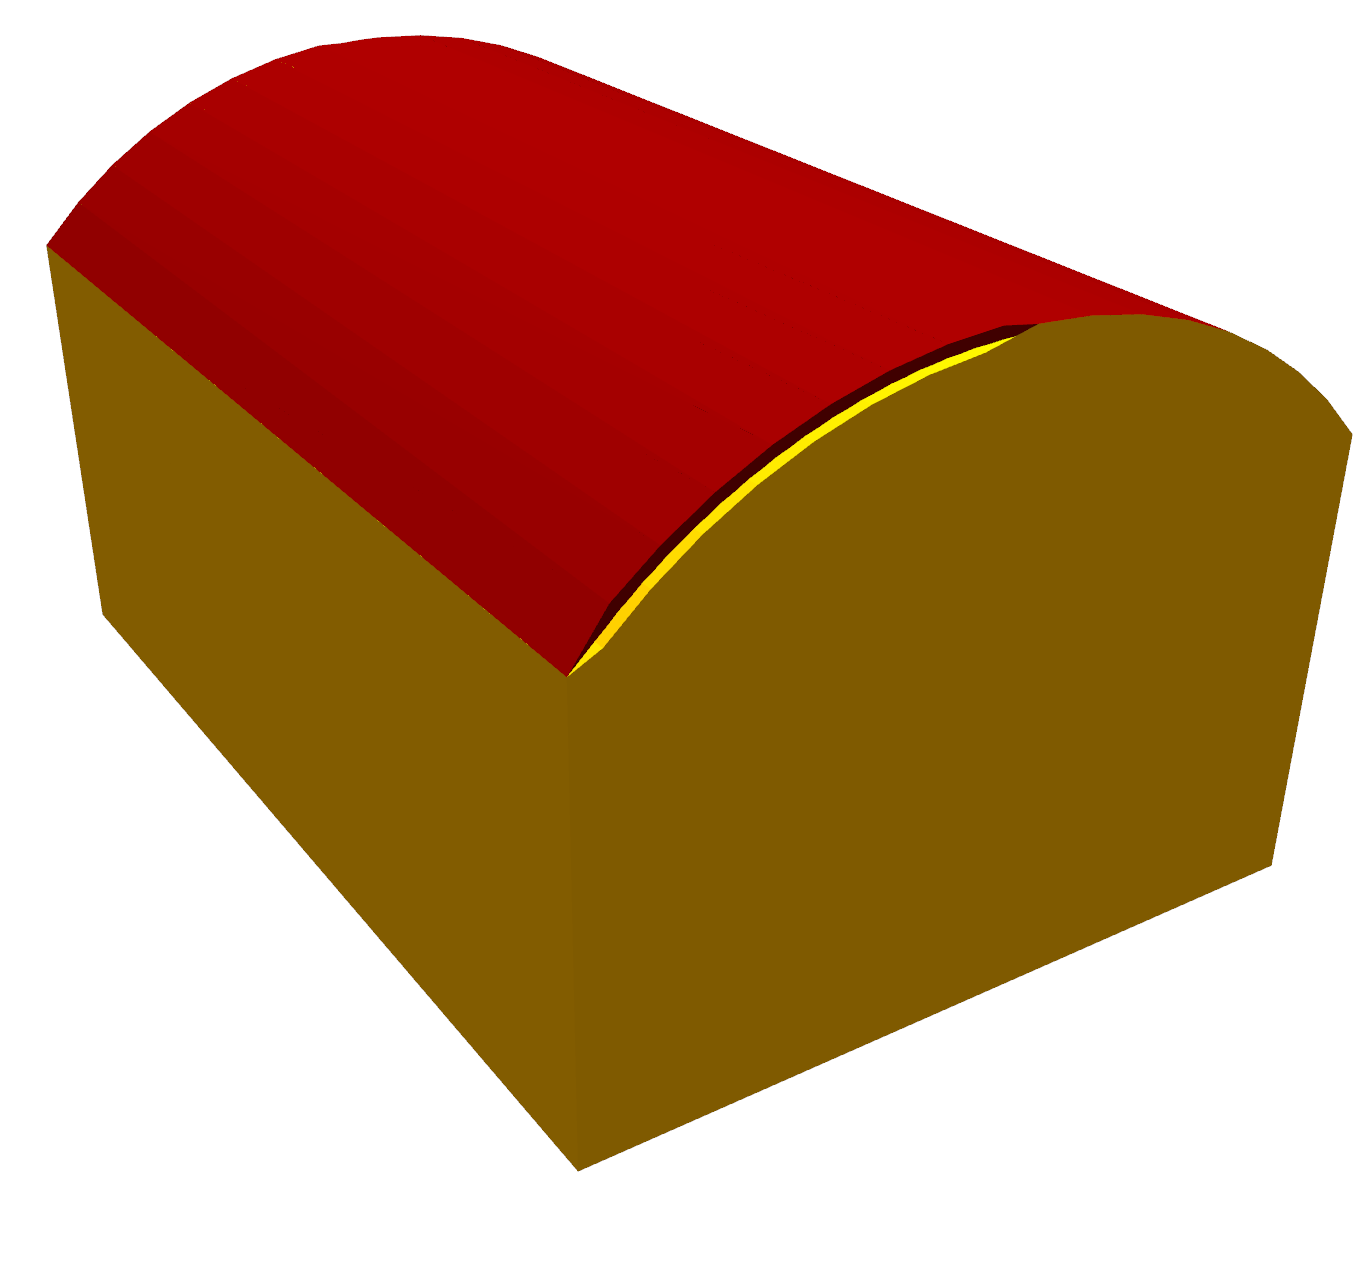 ../_images/Simple_Curved_Roof.png